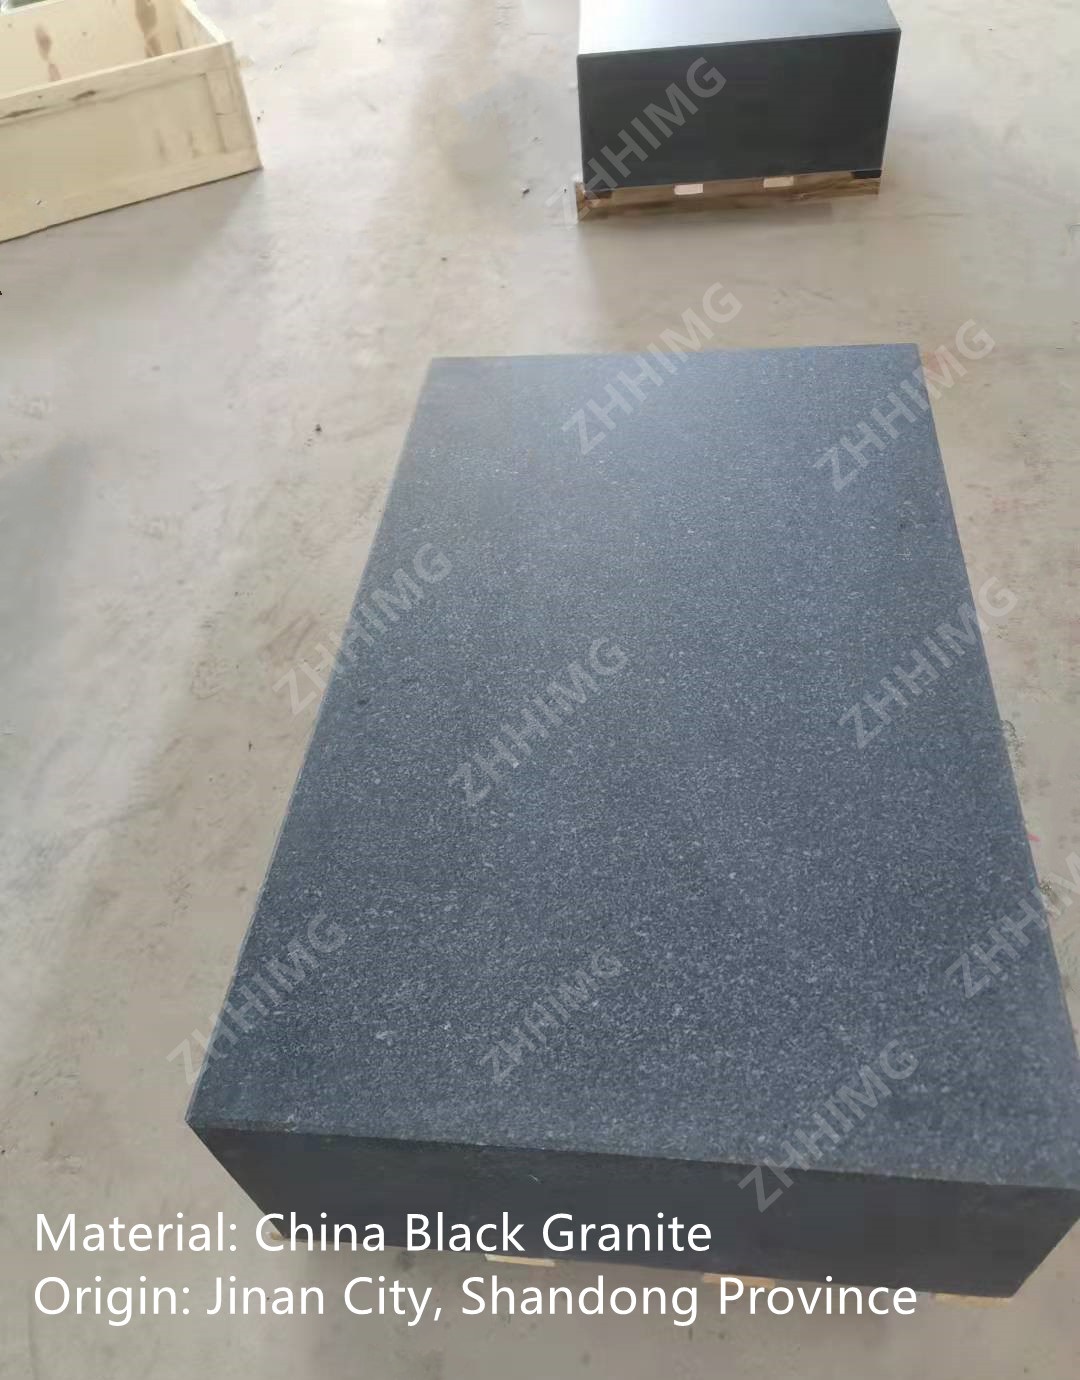 Congratulations! We found another China Black Granite with nice Physical Properties — Granite Surface Plate Made by China Black Granite